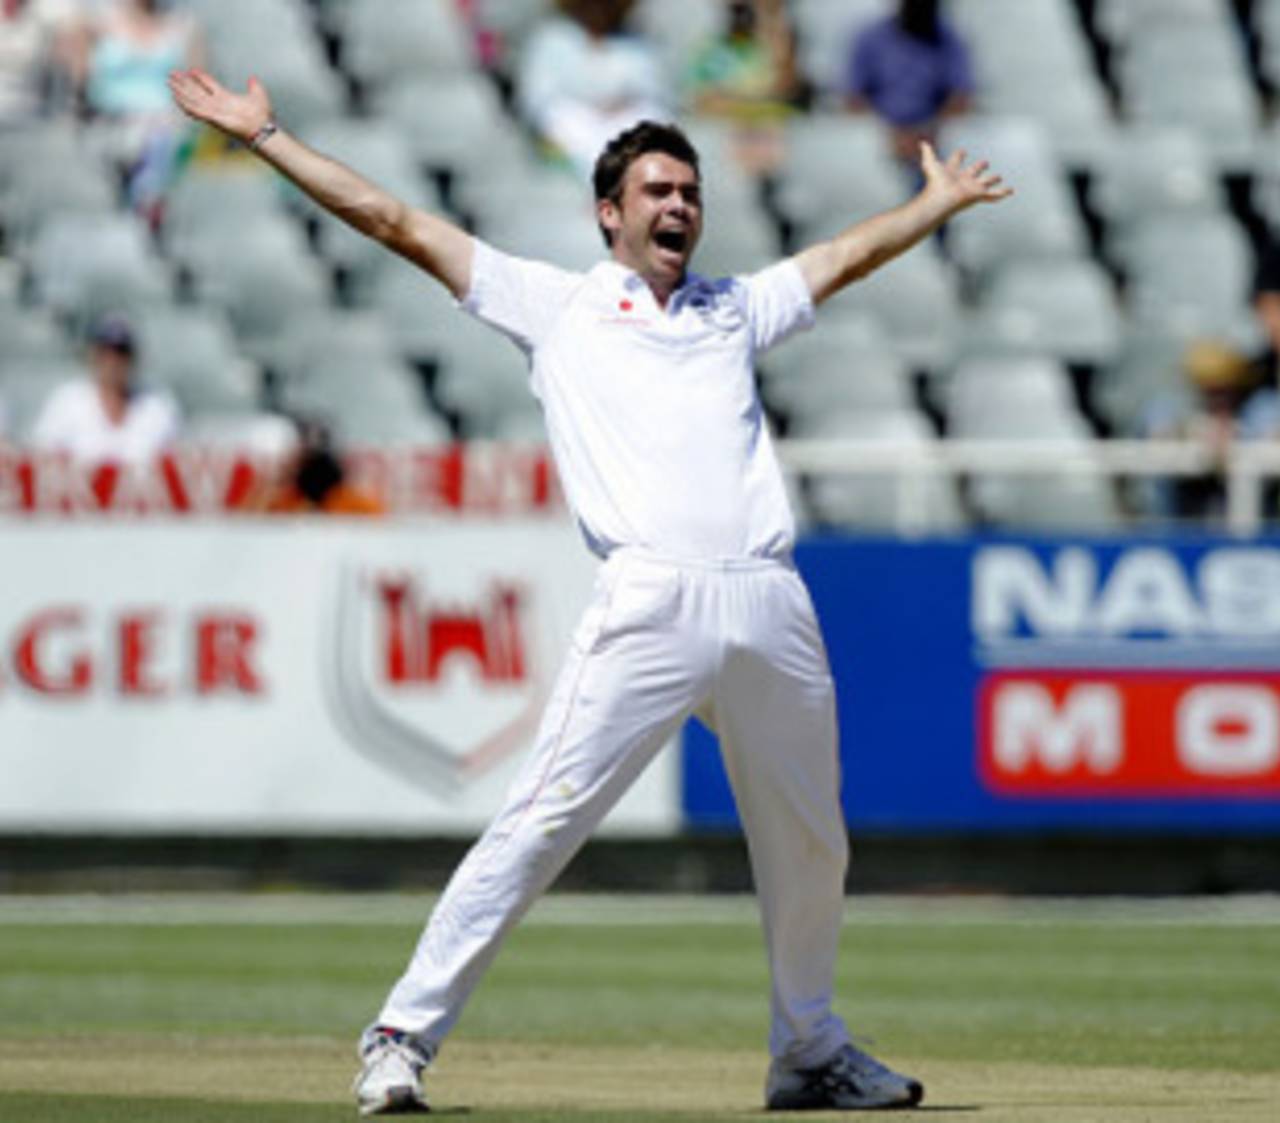 James Anderson collected the 8th five-wicket haul of his career as South Africa collapsed to 291 all out, South Africa v England, 3rd Test, Cape Town, January 4, 2009